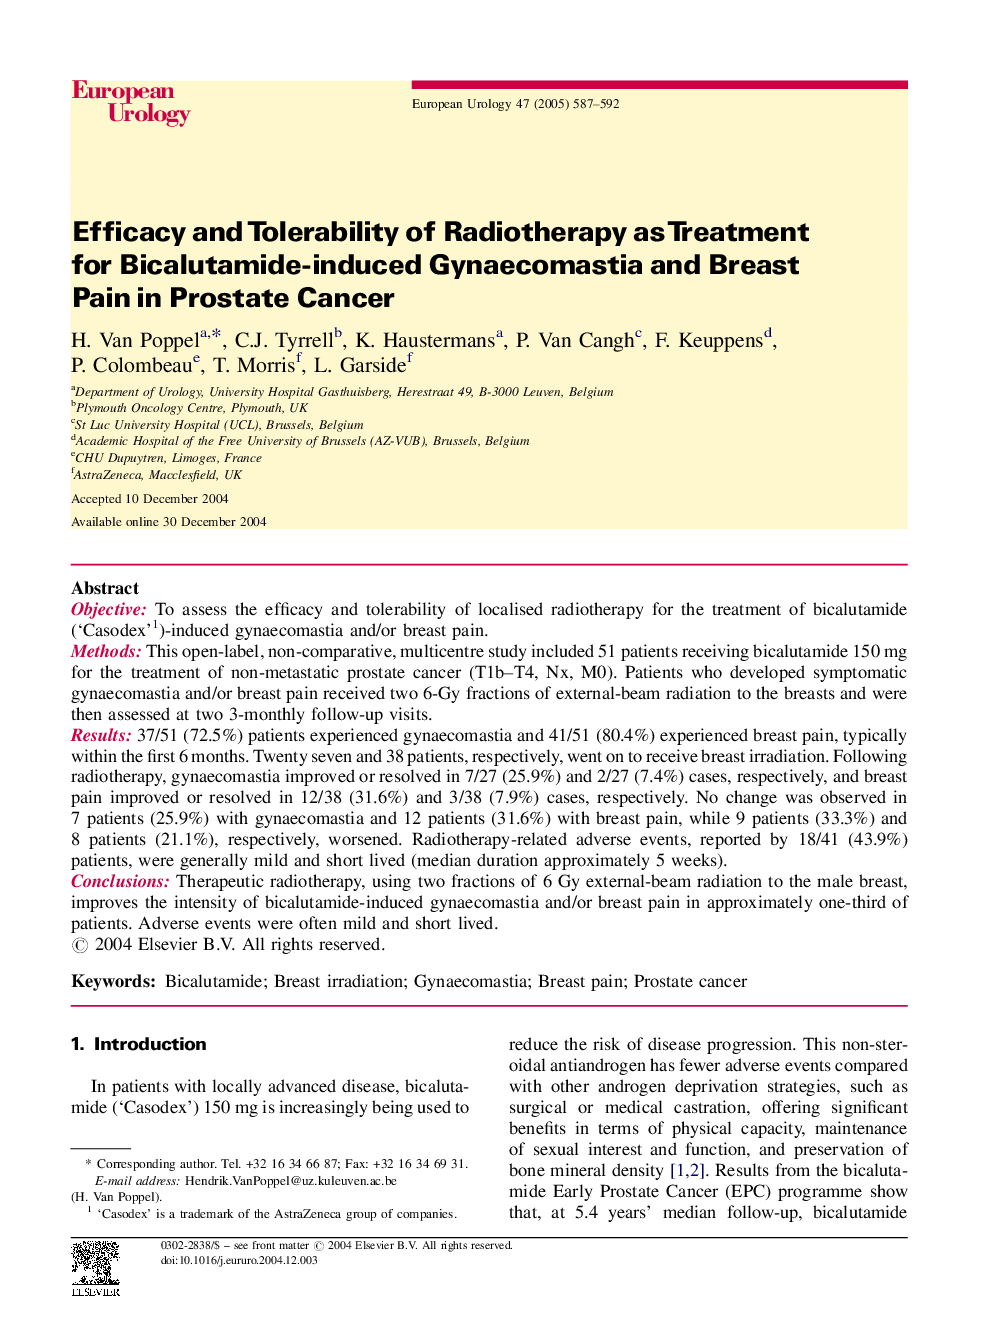 Efficacy and Tolerability of Radiotherapy as Treatment for Bicalutamide-induced Gynaecomastia and Breast Pain in Prostate Cancer